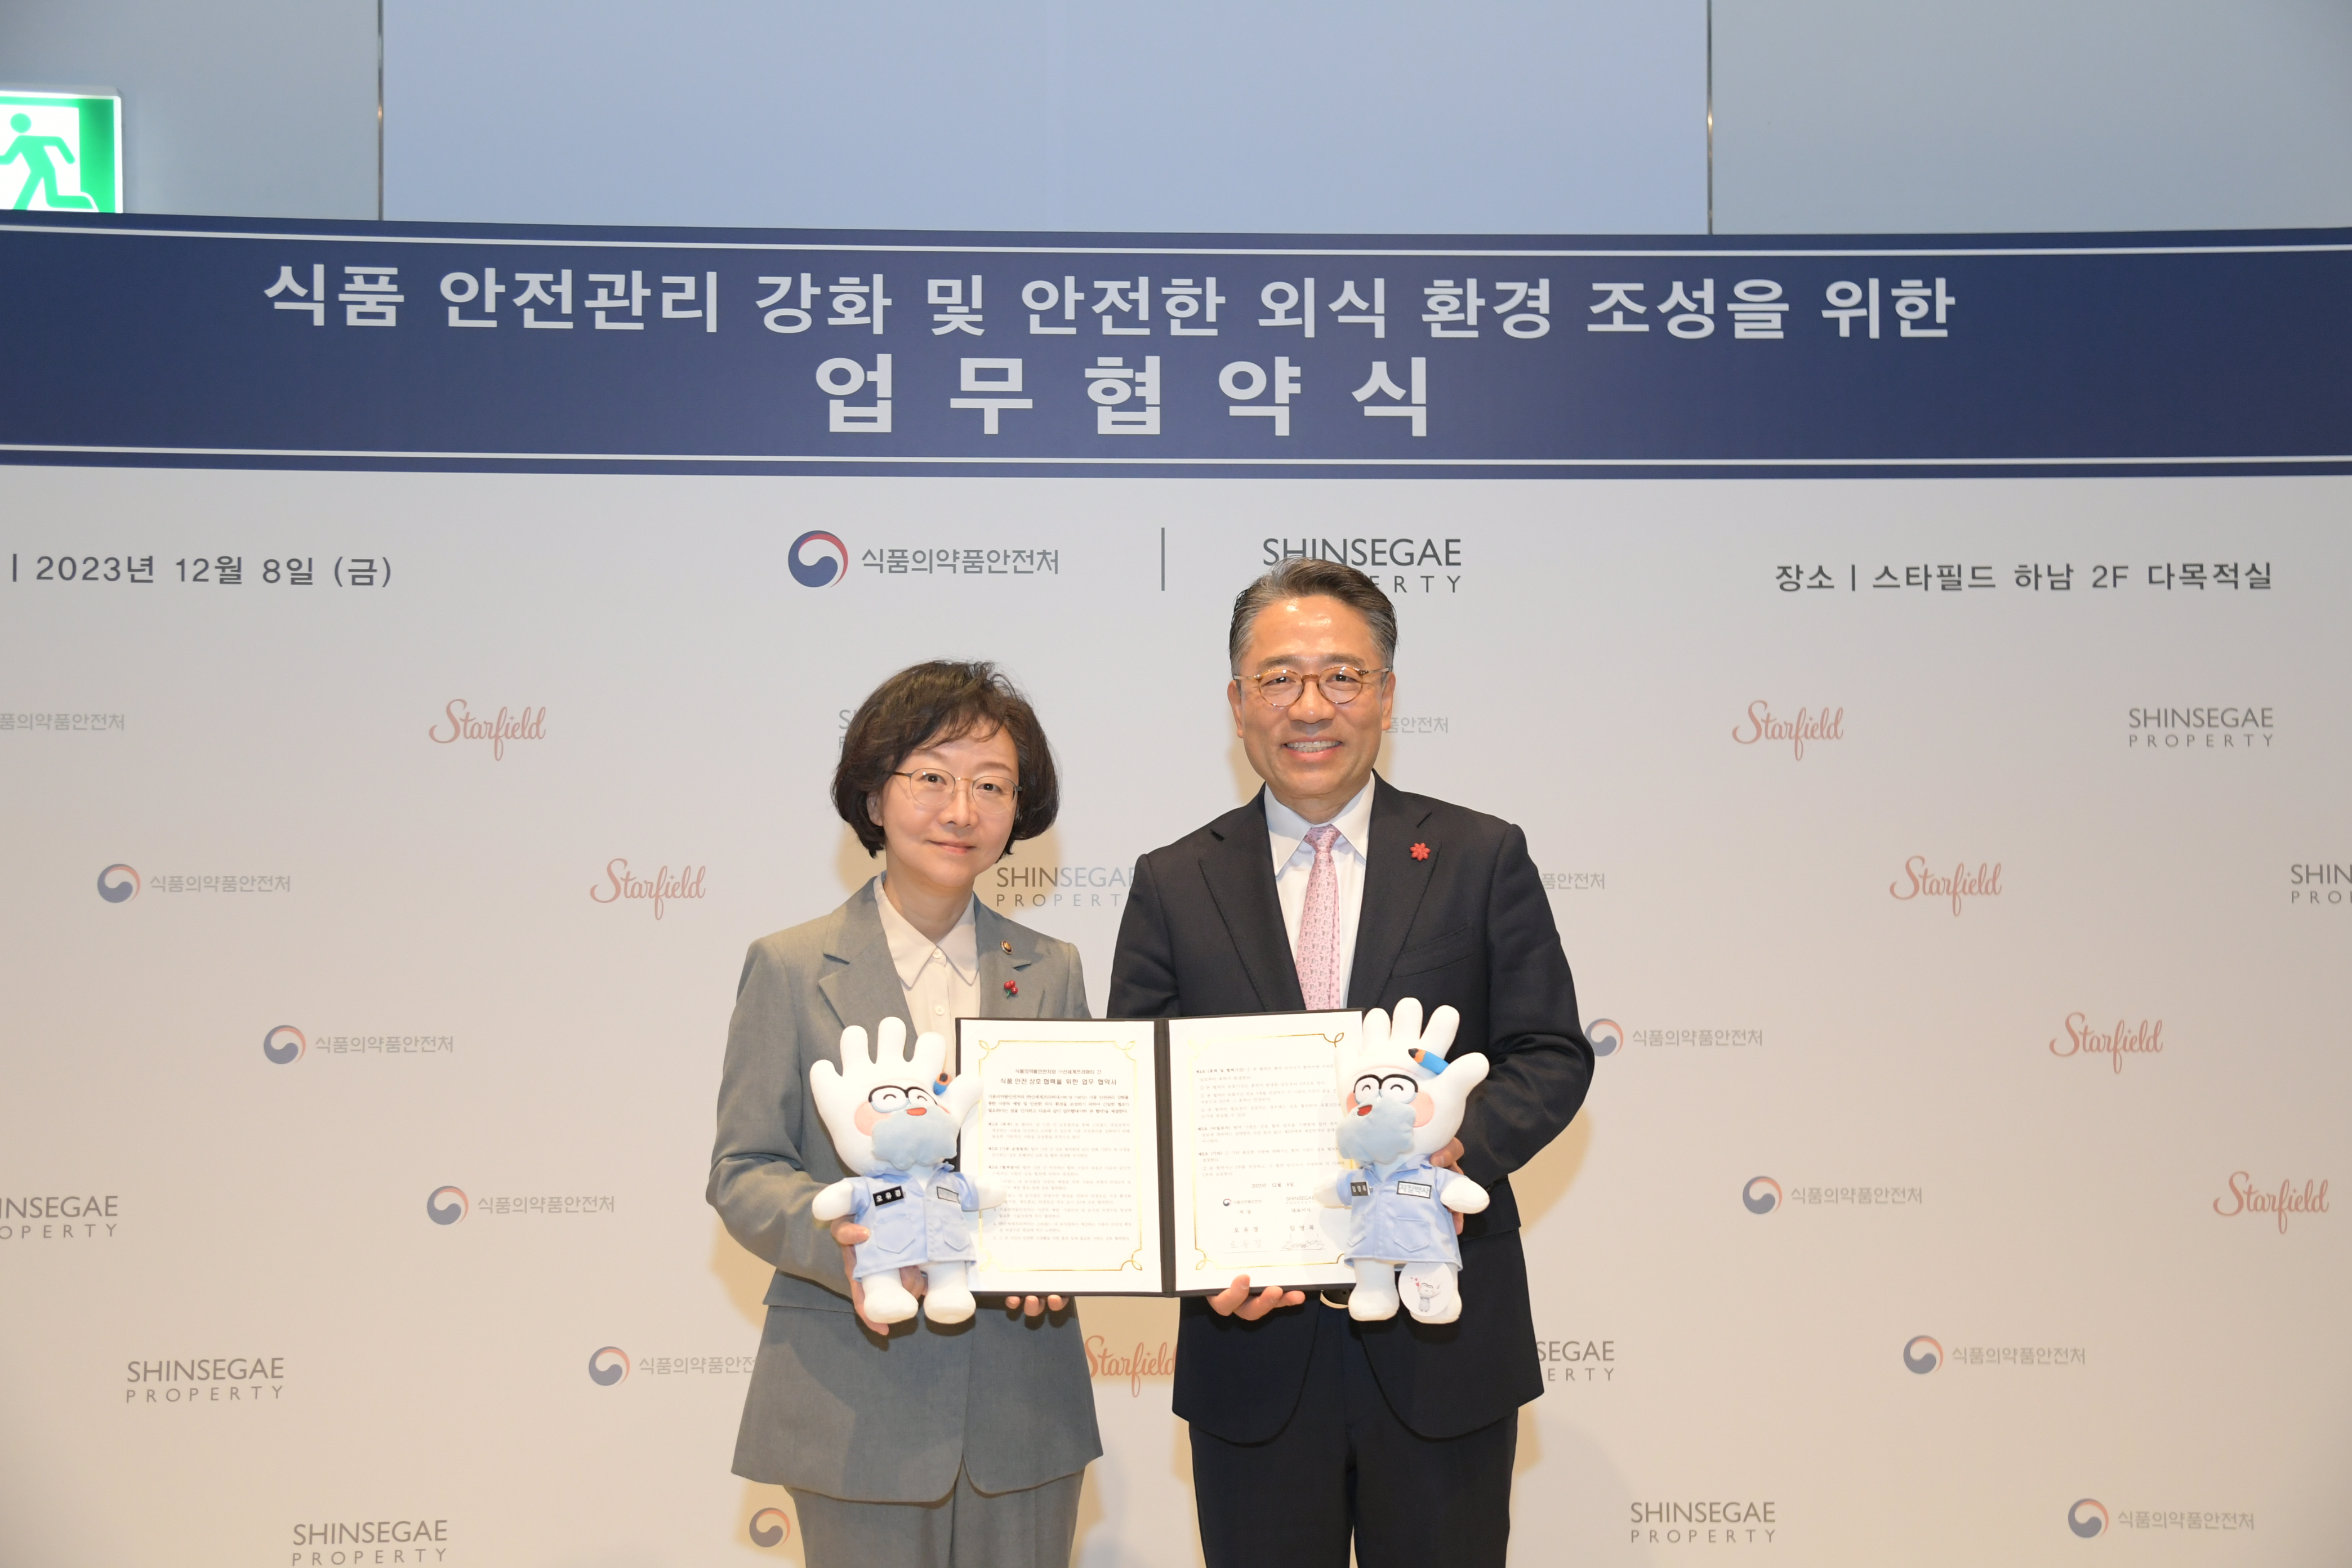 Photo News1 - [Dec 8, 2023]MFDS and Shinsegae Property signed the Food Safety MOU